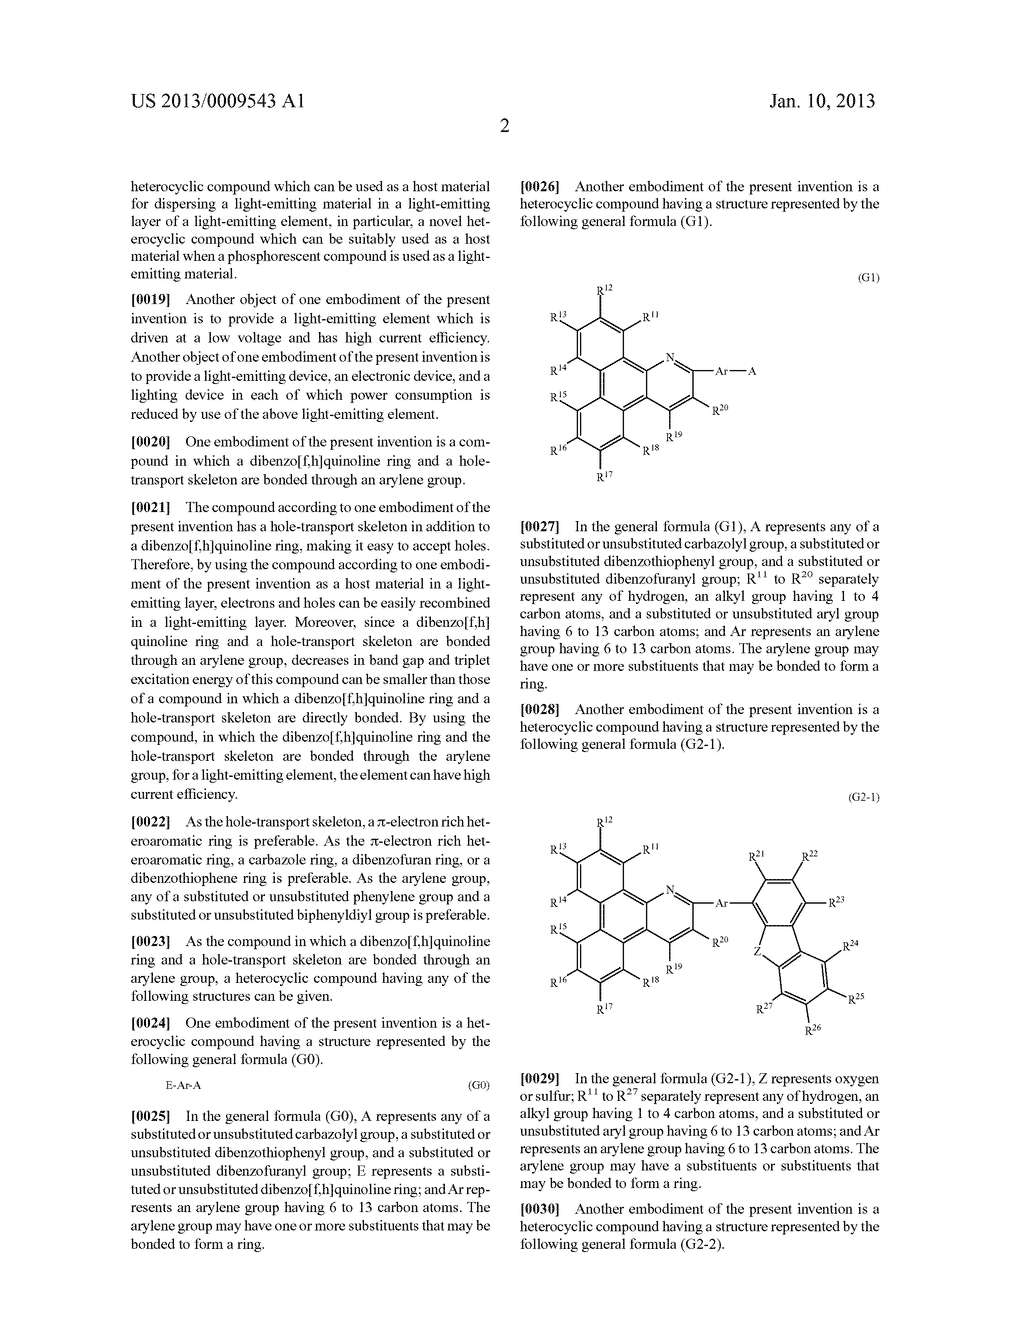 HETEROCYCLIC COMPOUND, LIGHT-EMITTING ELEMENT, LIGHT-EMITTING DEVICE,     ELECTRONIC DEVICE, AND LIGHTING DEVICE - diagram, schematic, and image 25